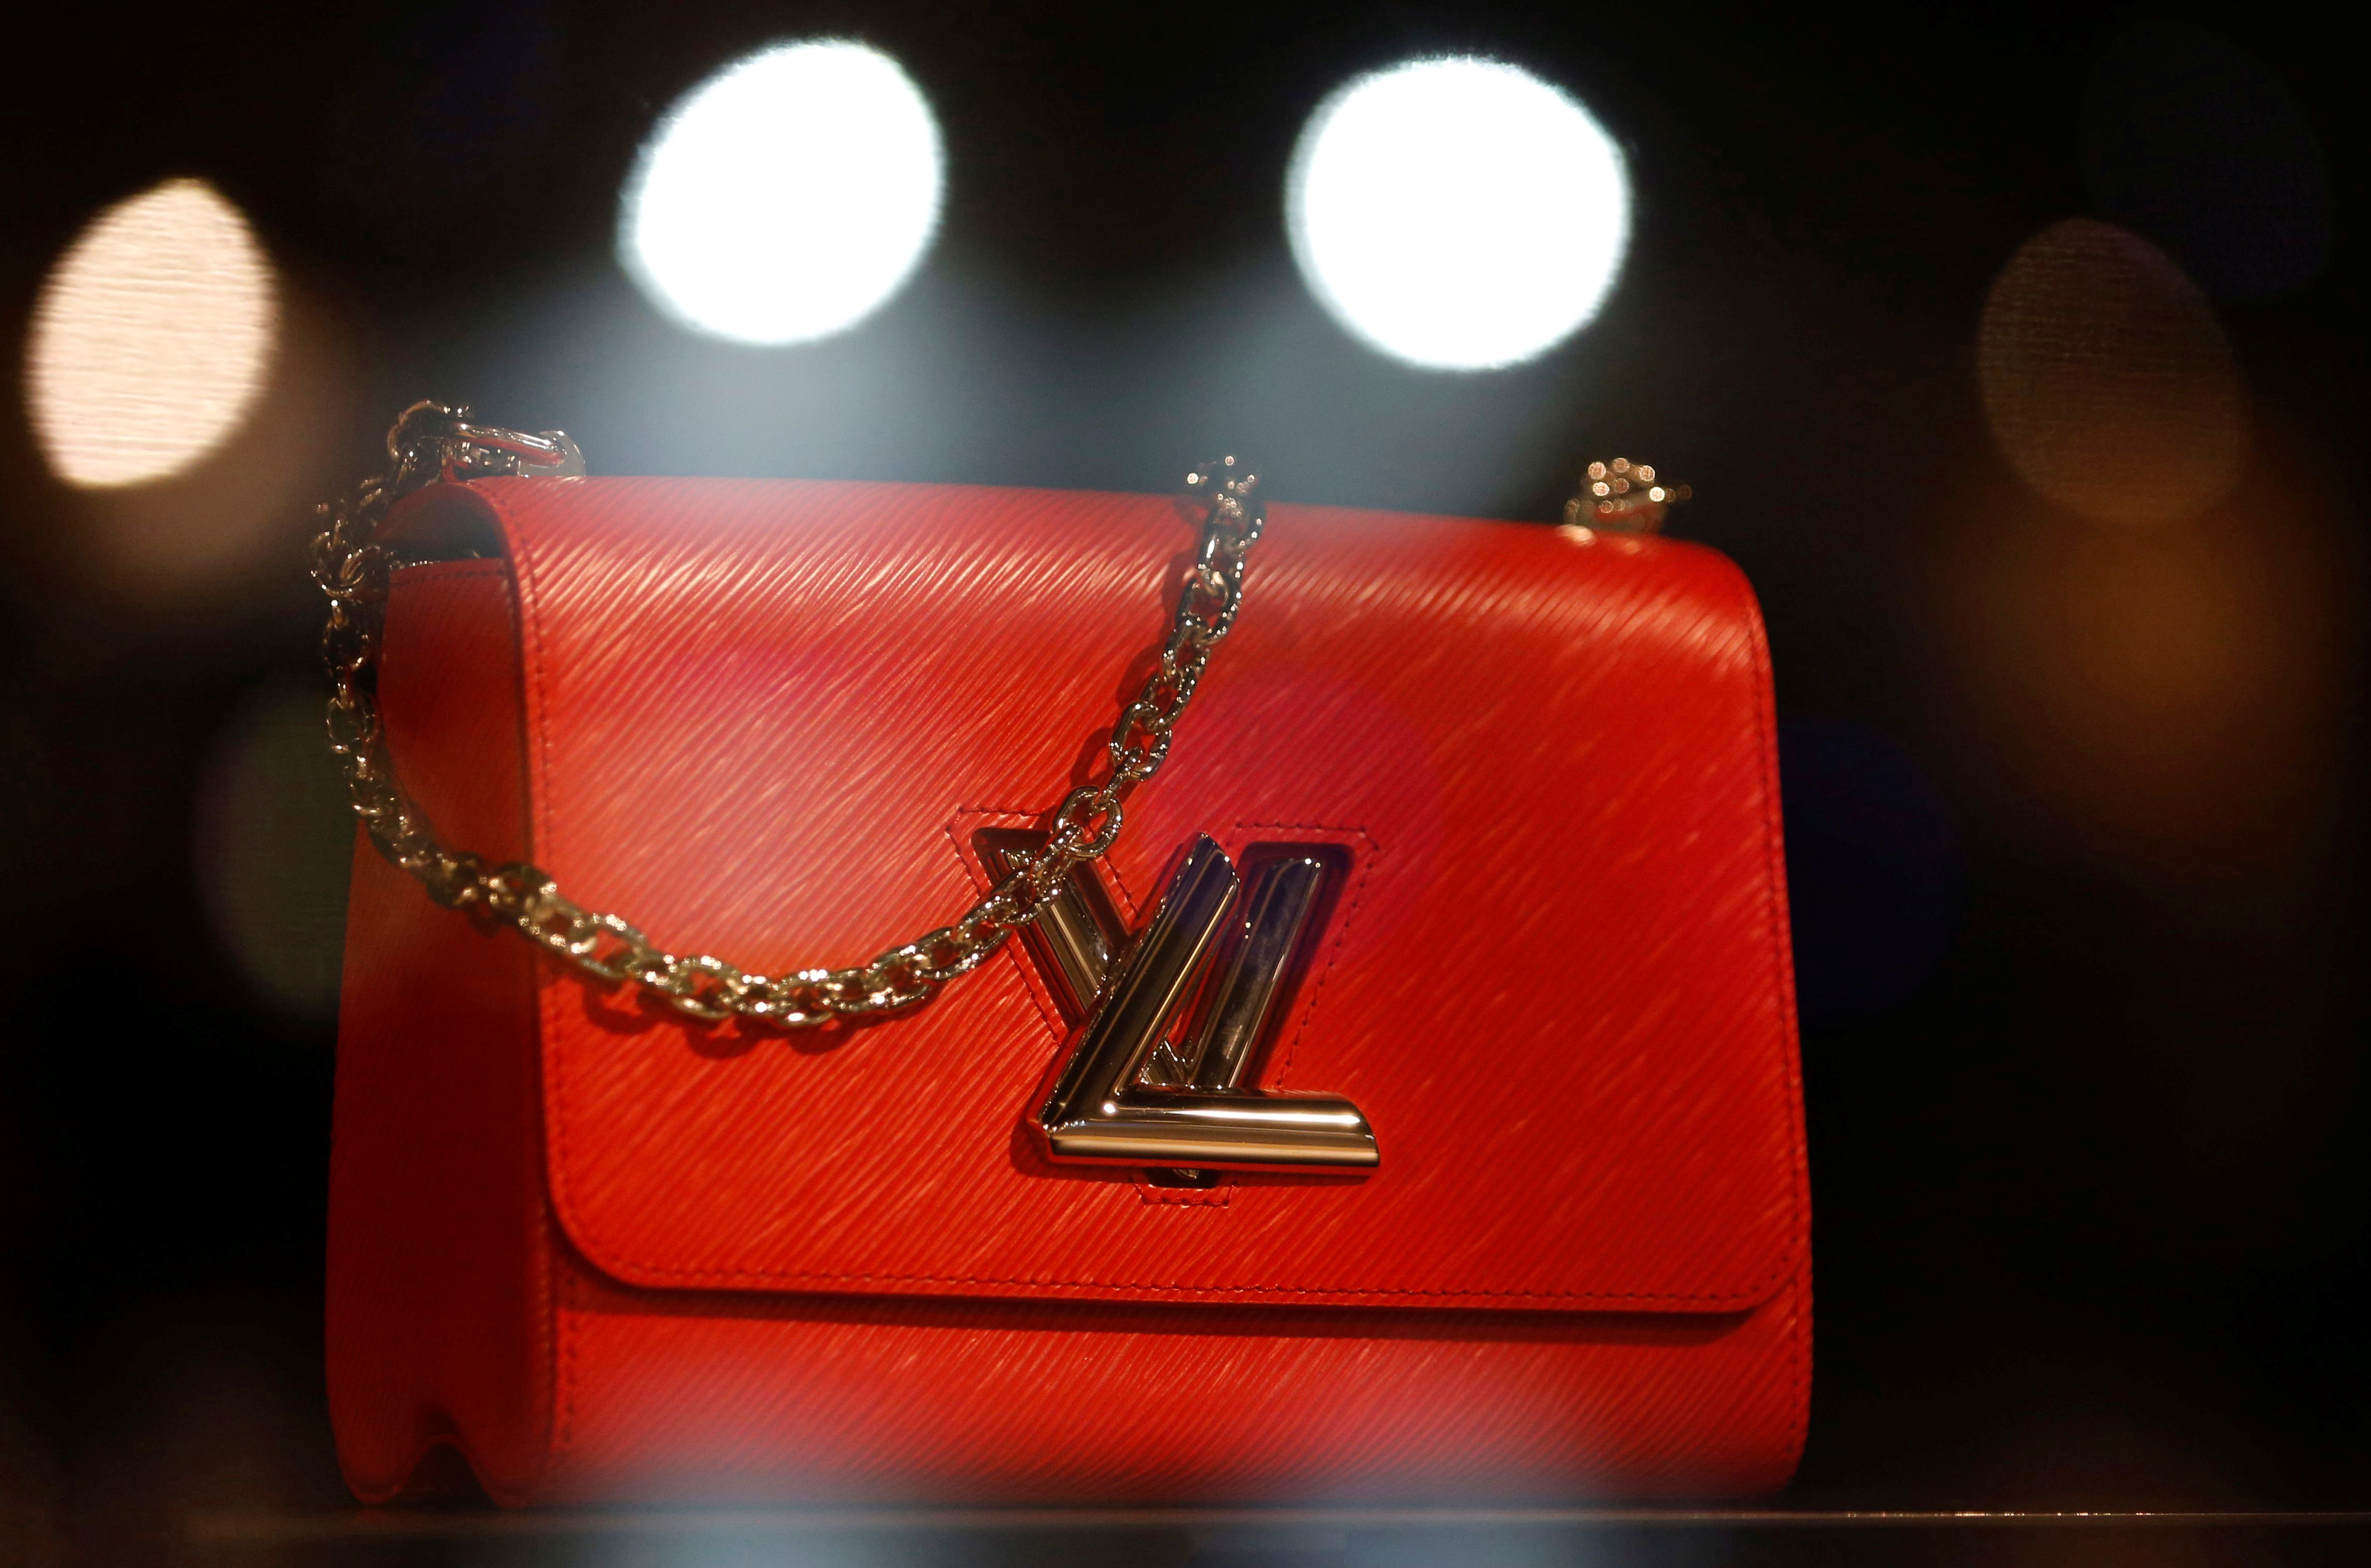 The logo of Louis Vuitton is seen on a handbag at a Louis Vuitton store in Bordeaux